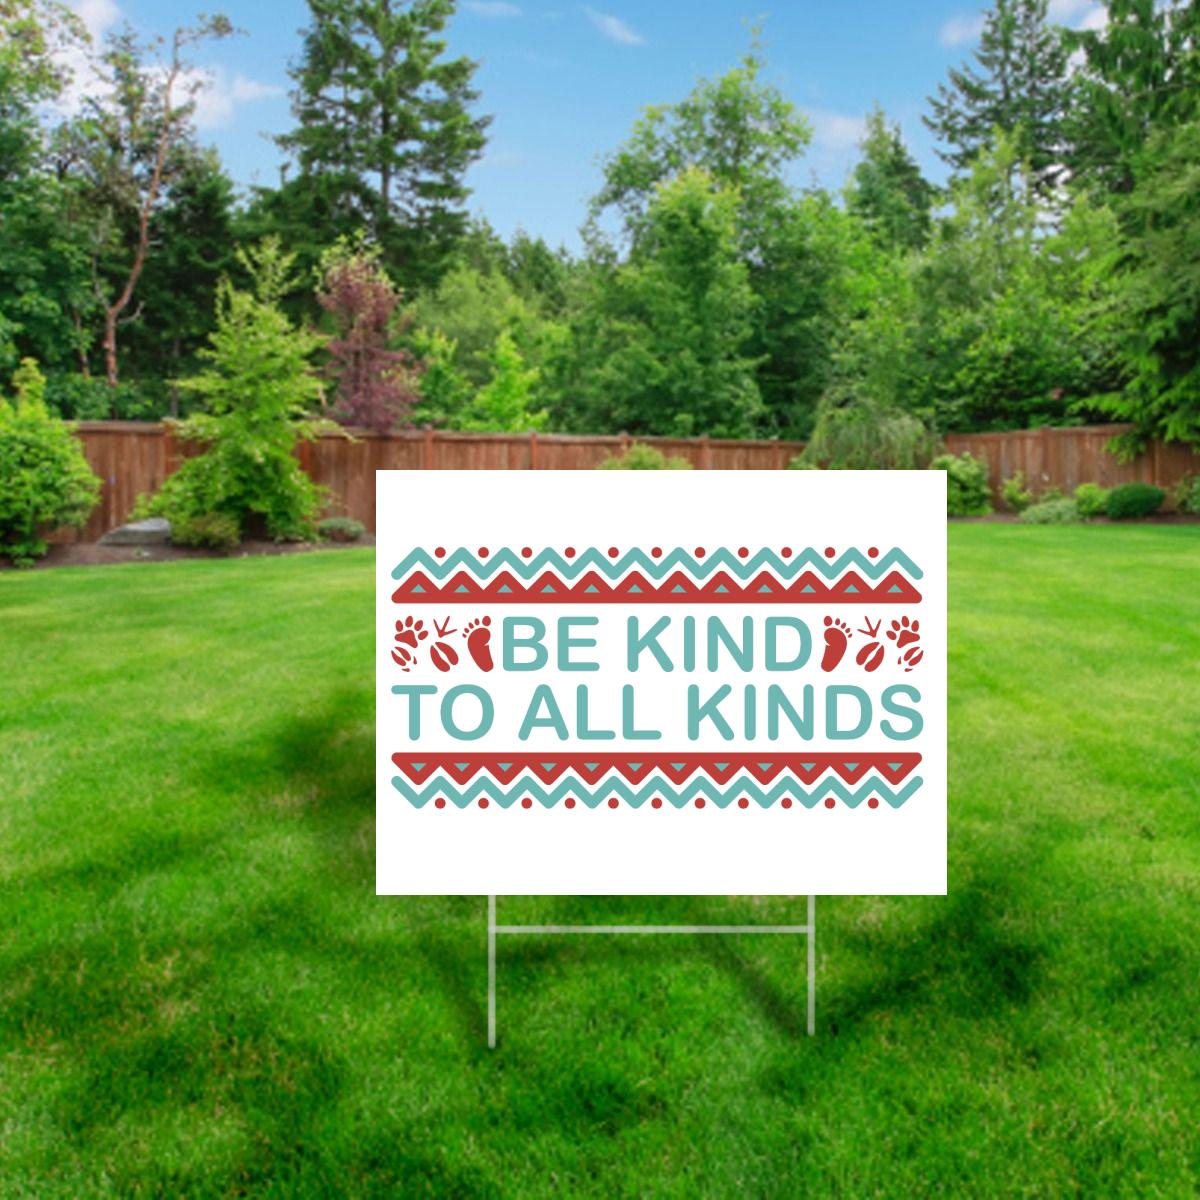 vegan lawn sign saying be kind to all kinds